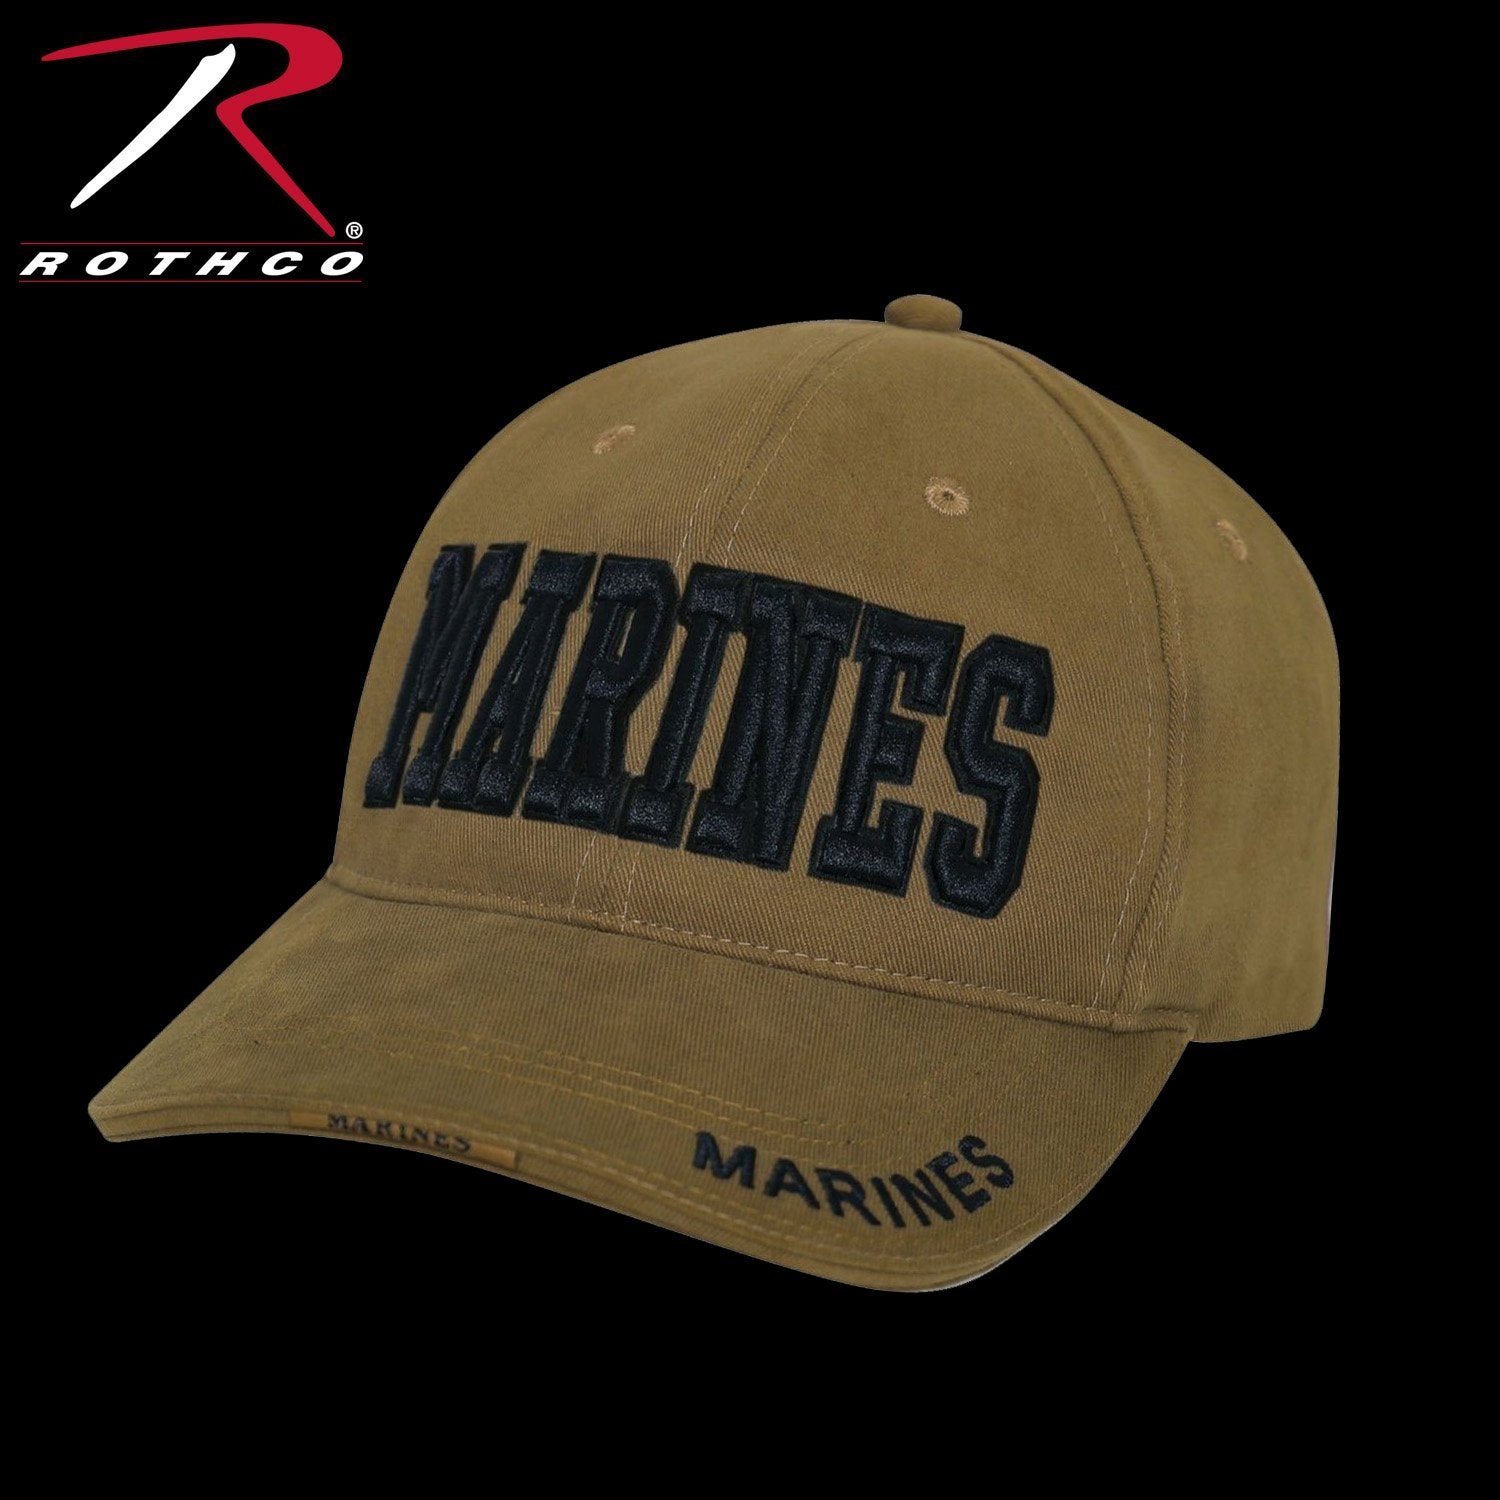 XCPT CLOSEOUT Deluxe Marines Coyote Brown Low Profile Cap - Marine Corps Direct